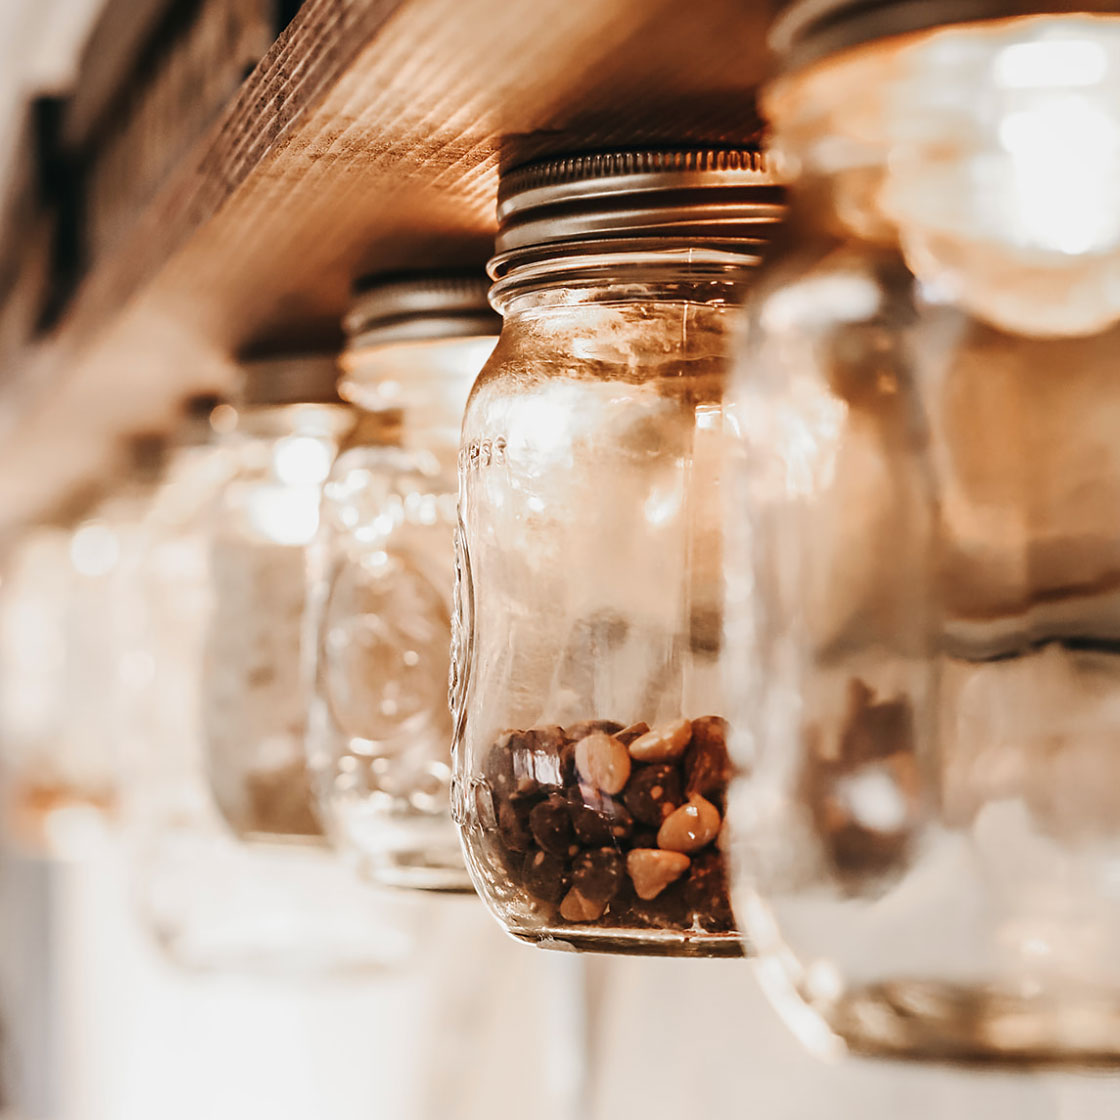 Mason jars hanging from the side of kitchen space in converted bus